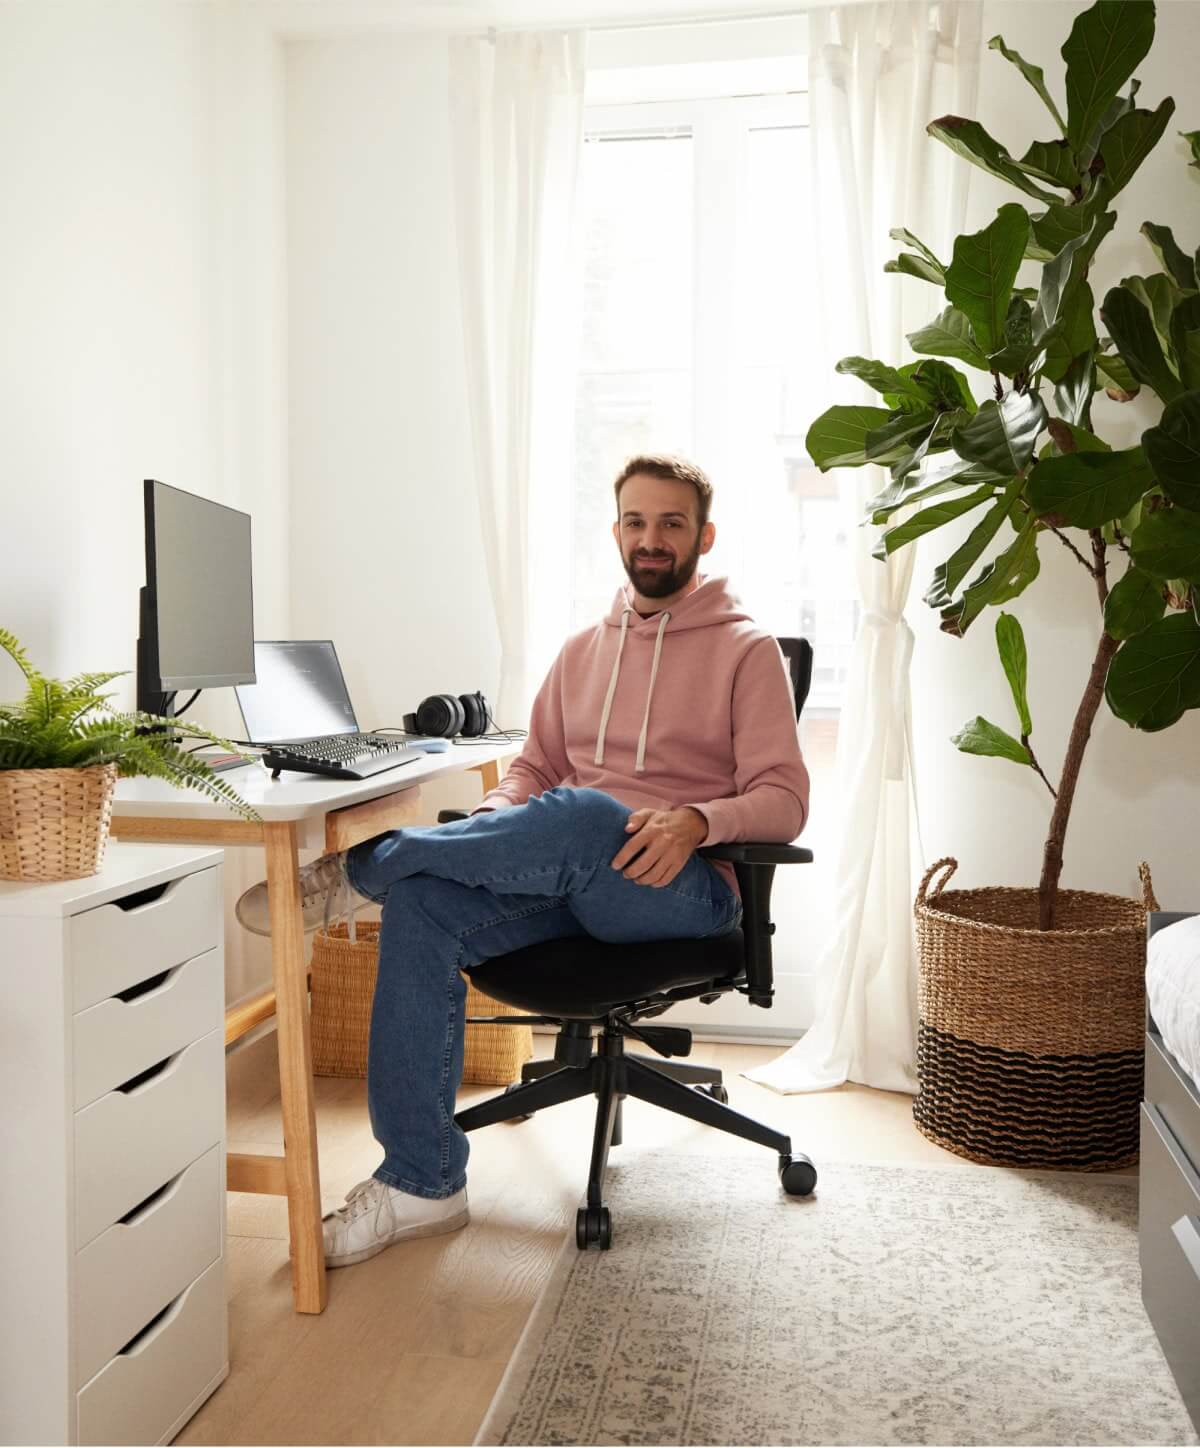 Content while working from home: An engaged Workleap employee, showcasing productivity and comfort in a remote work environment